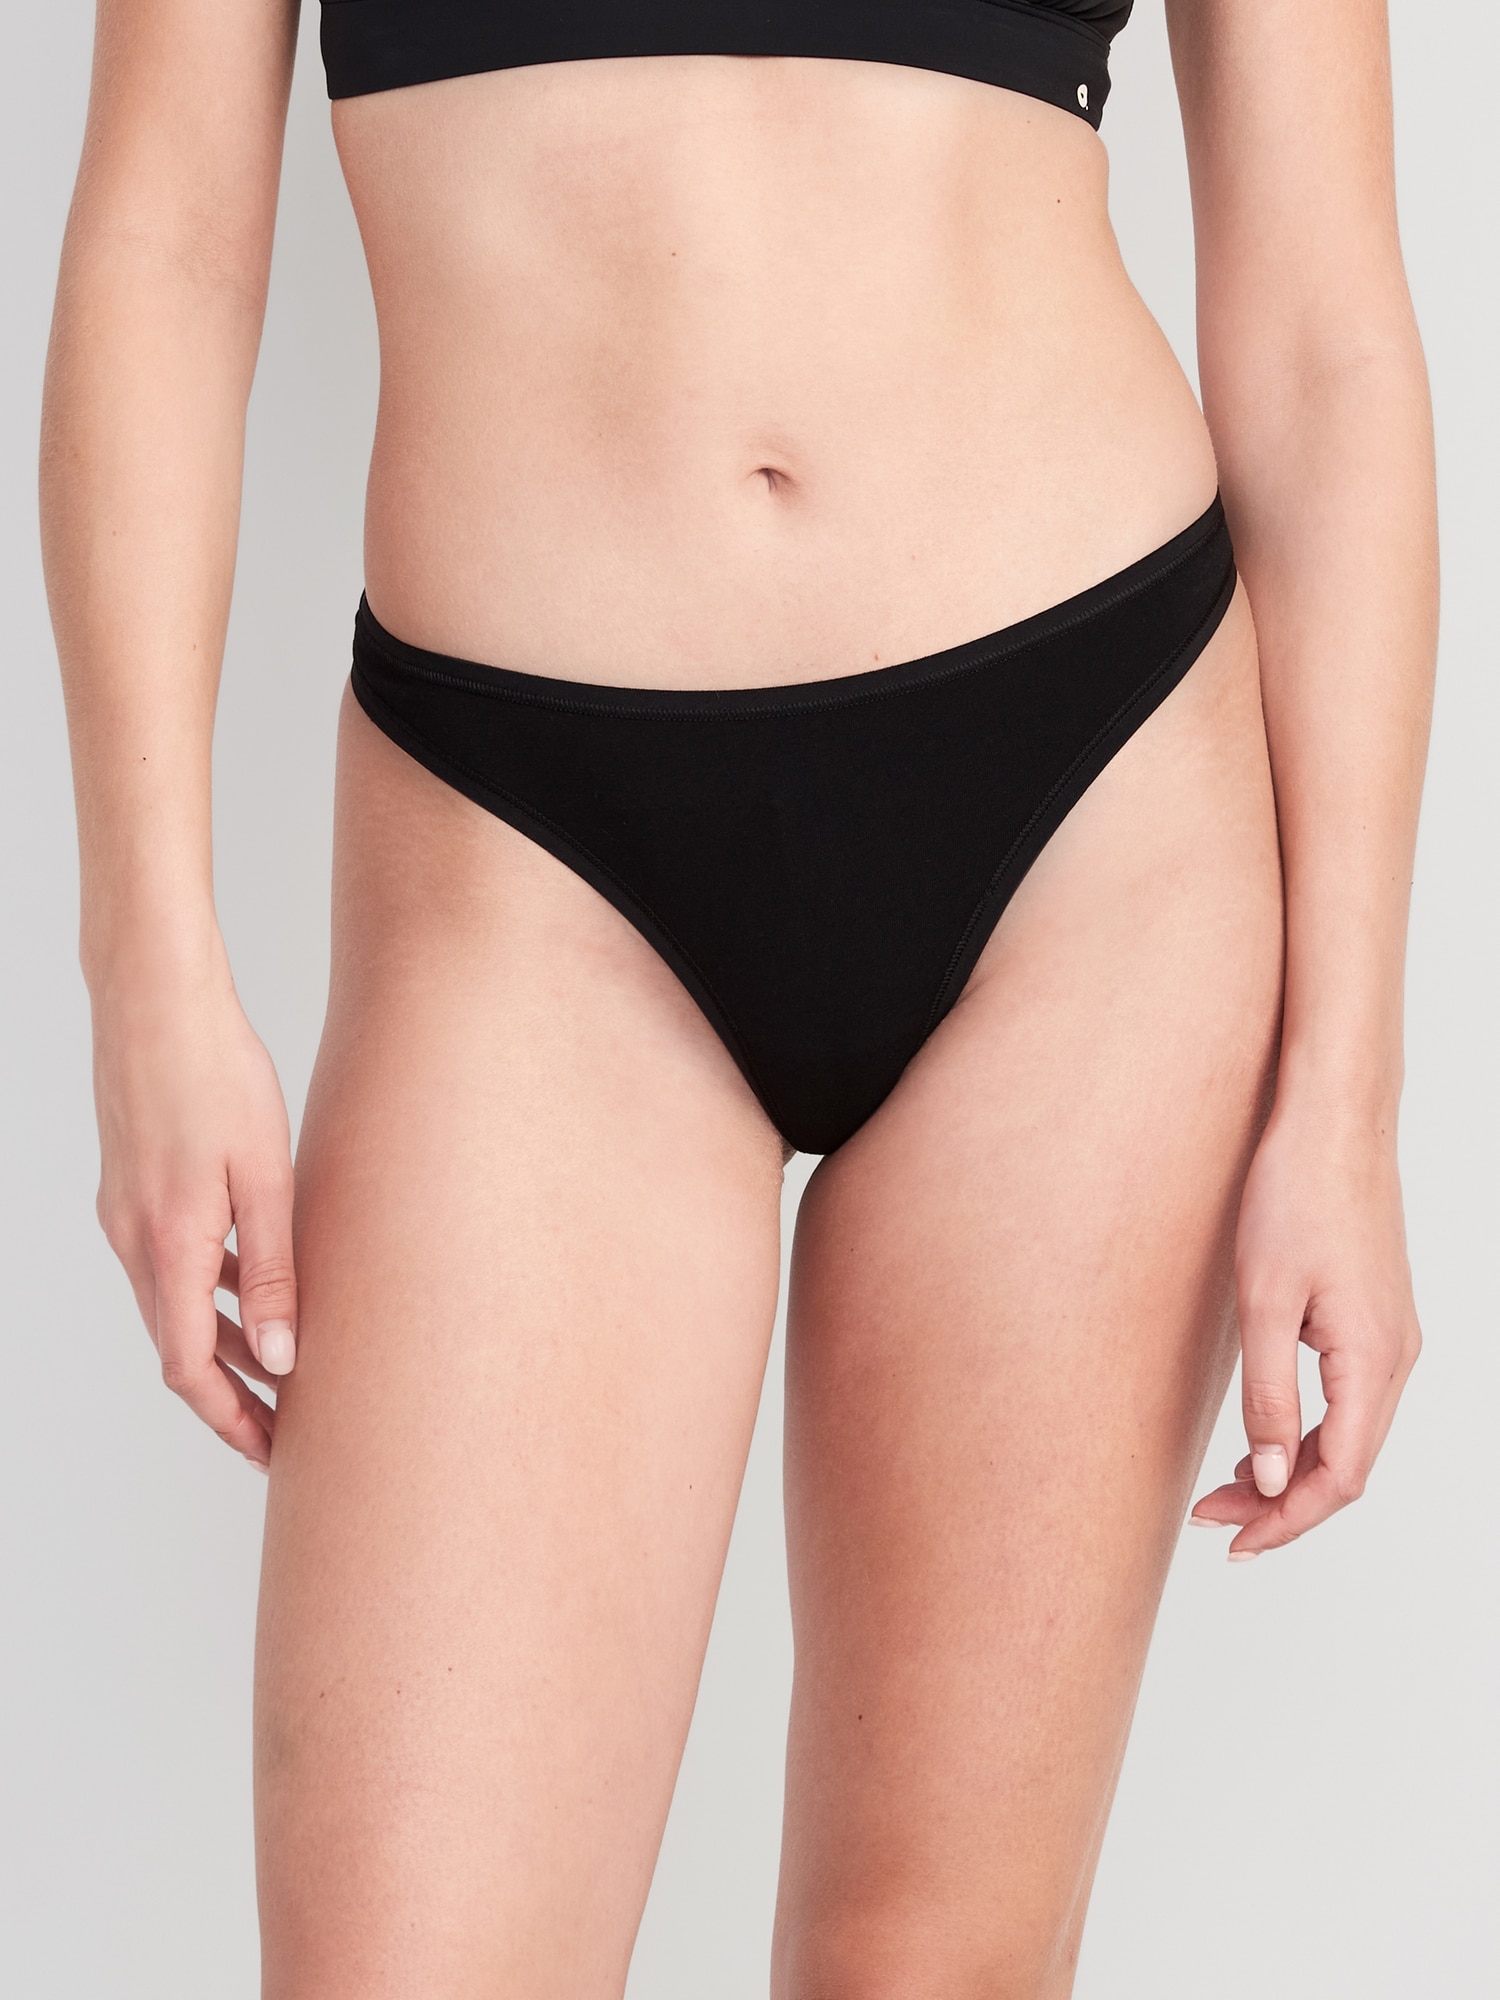 Matching Low-Rise Classic Thong Underwear